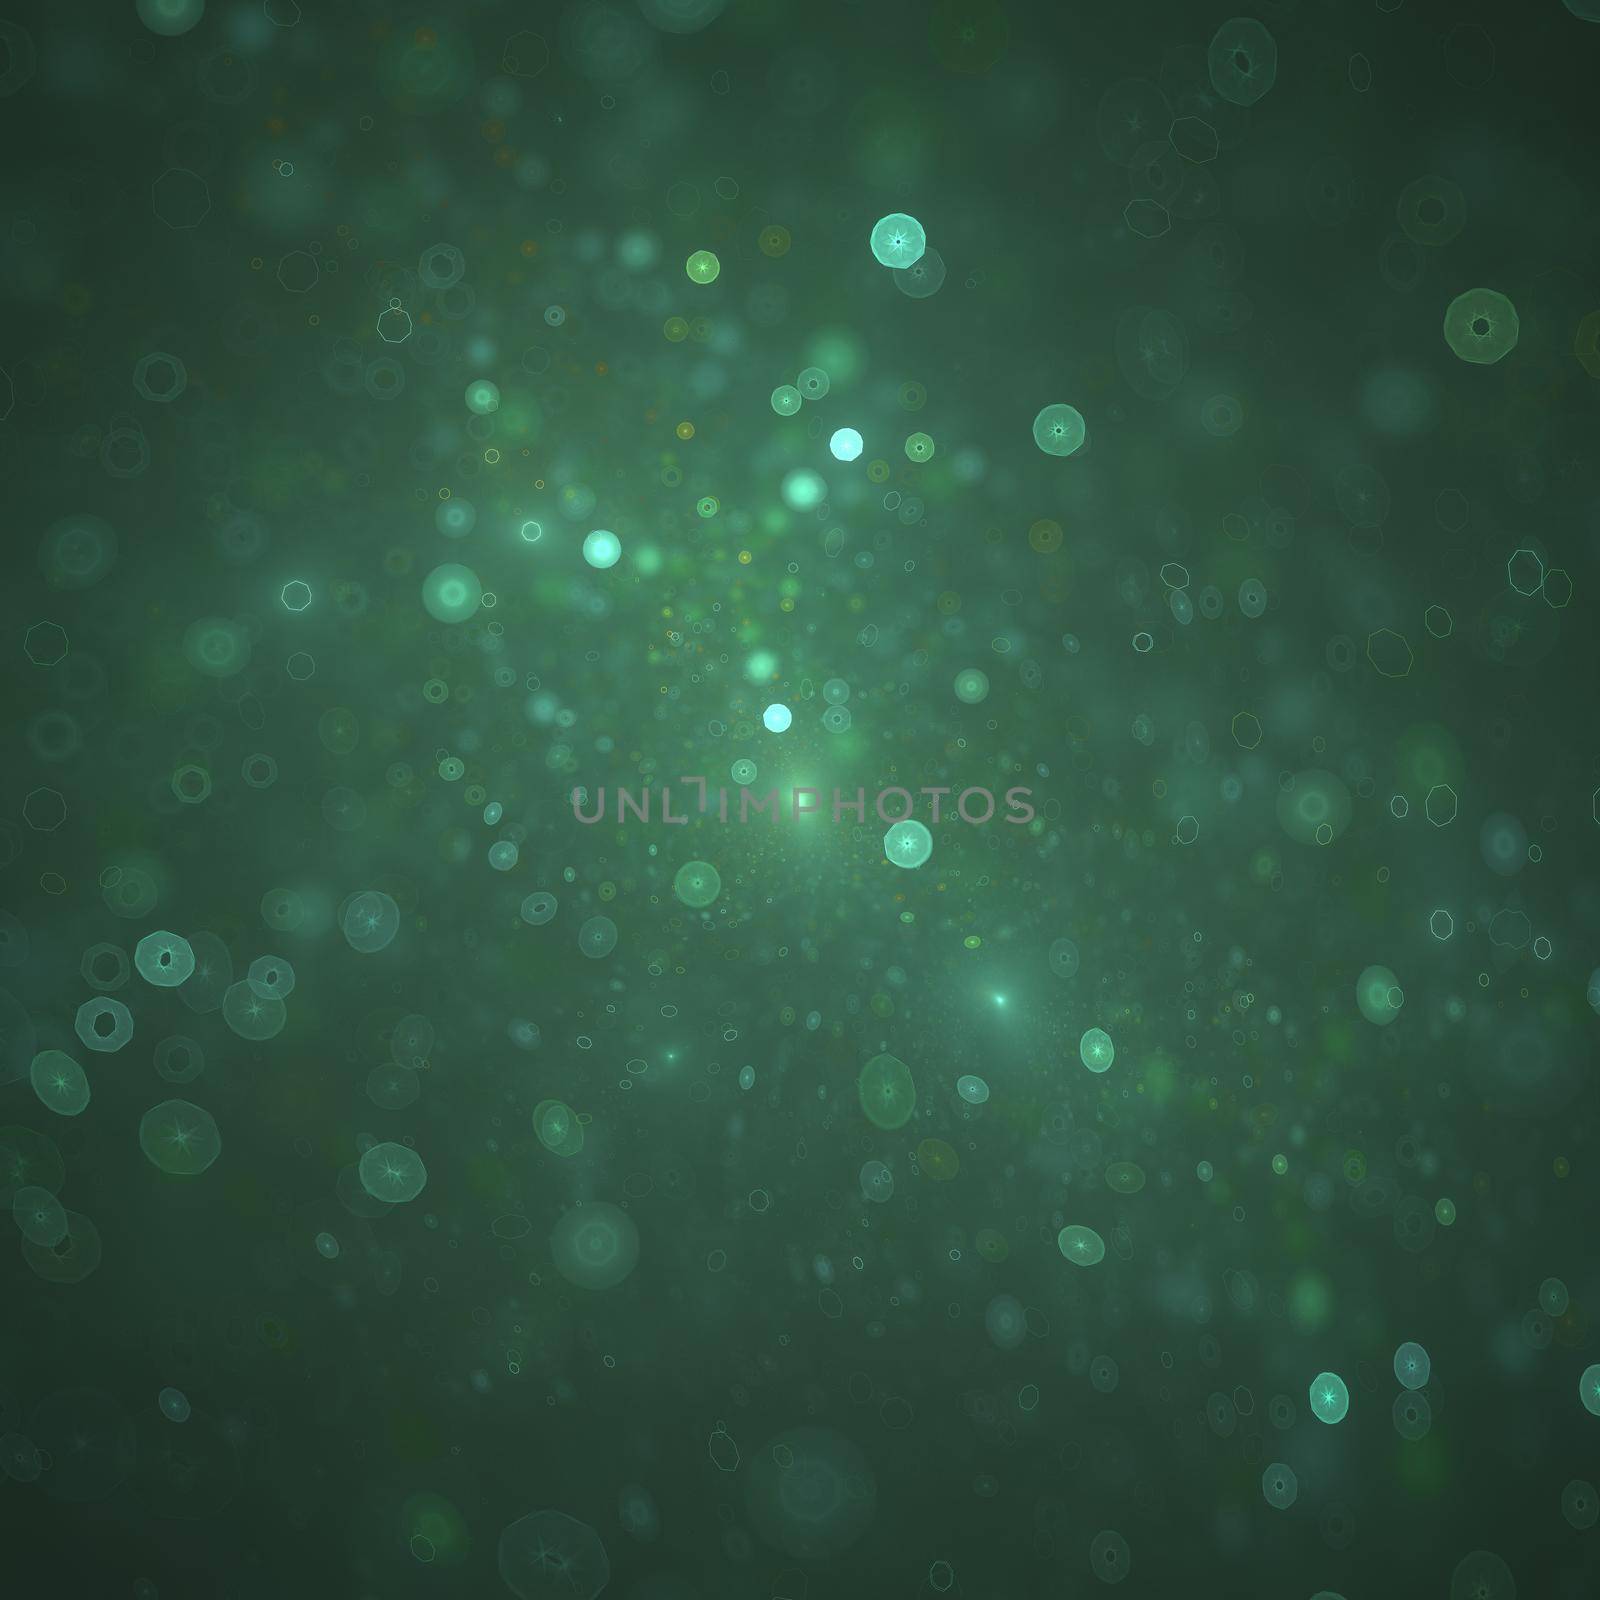 Abstract microscopic particles in liquid background, medical illustration by clusterx